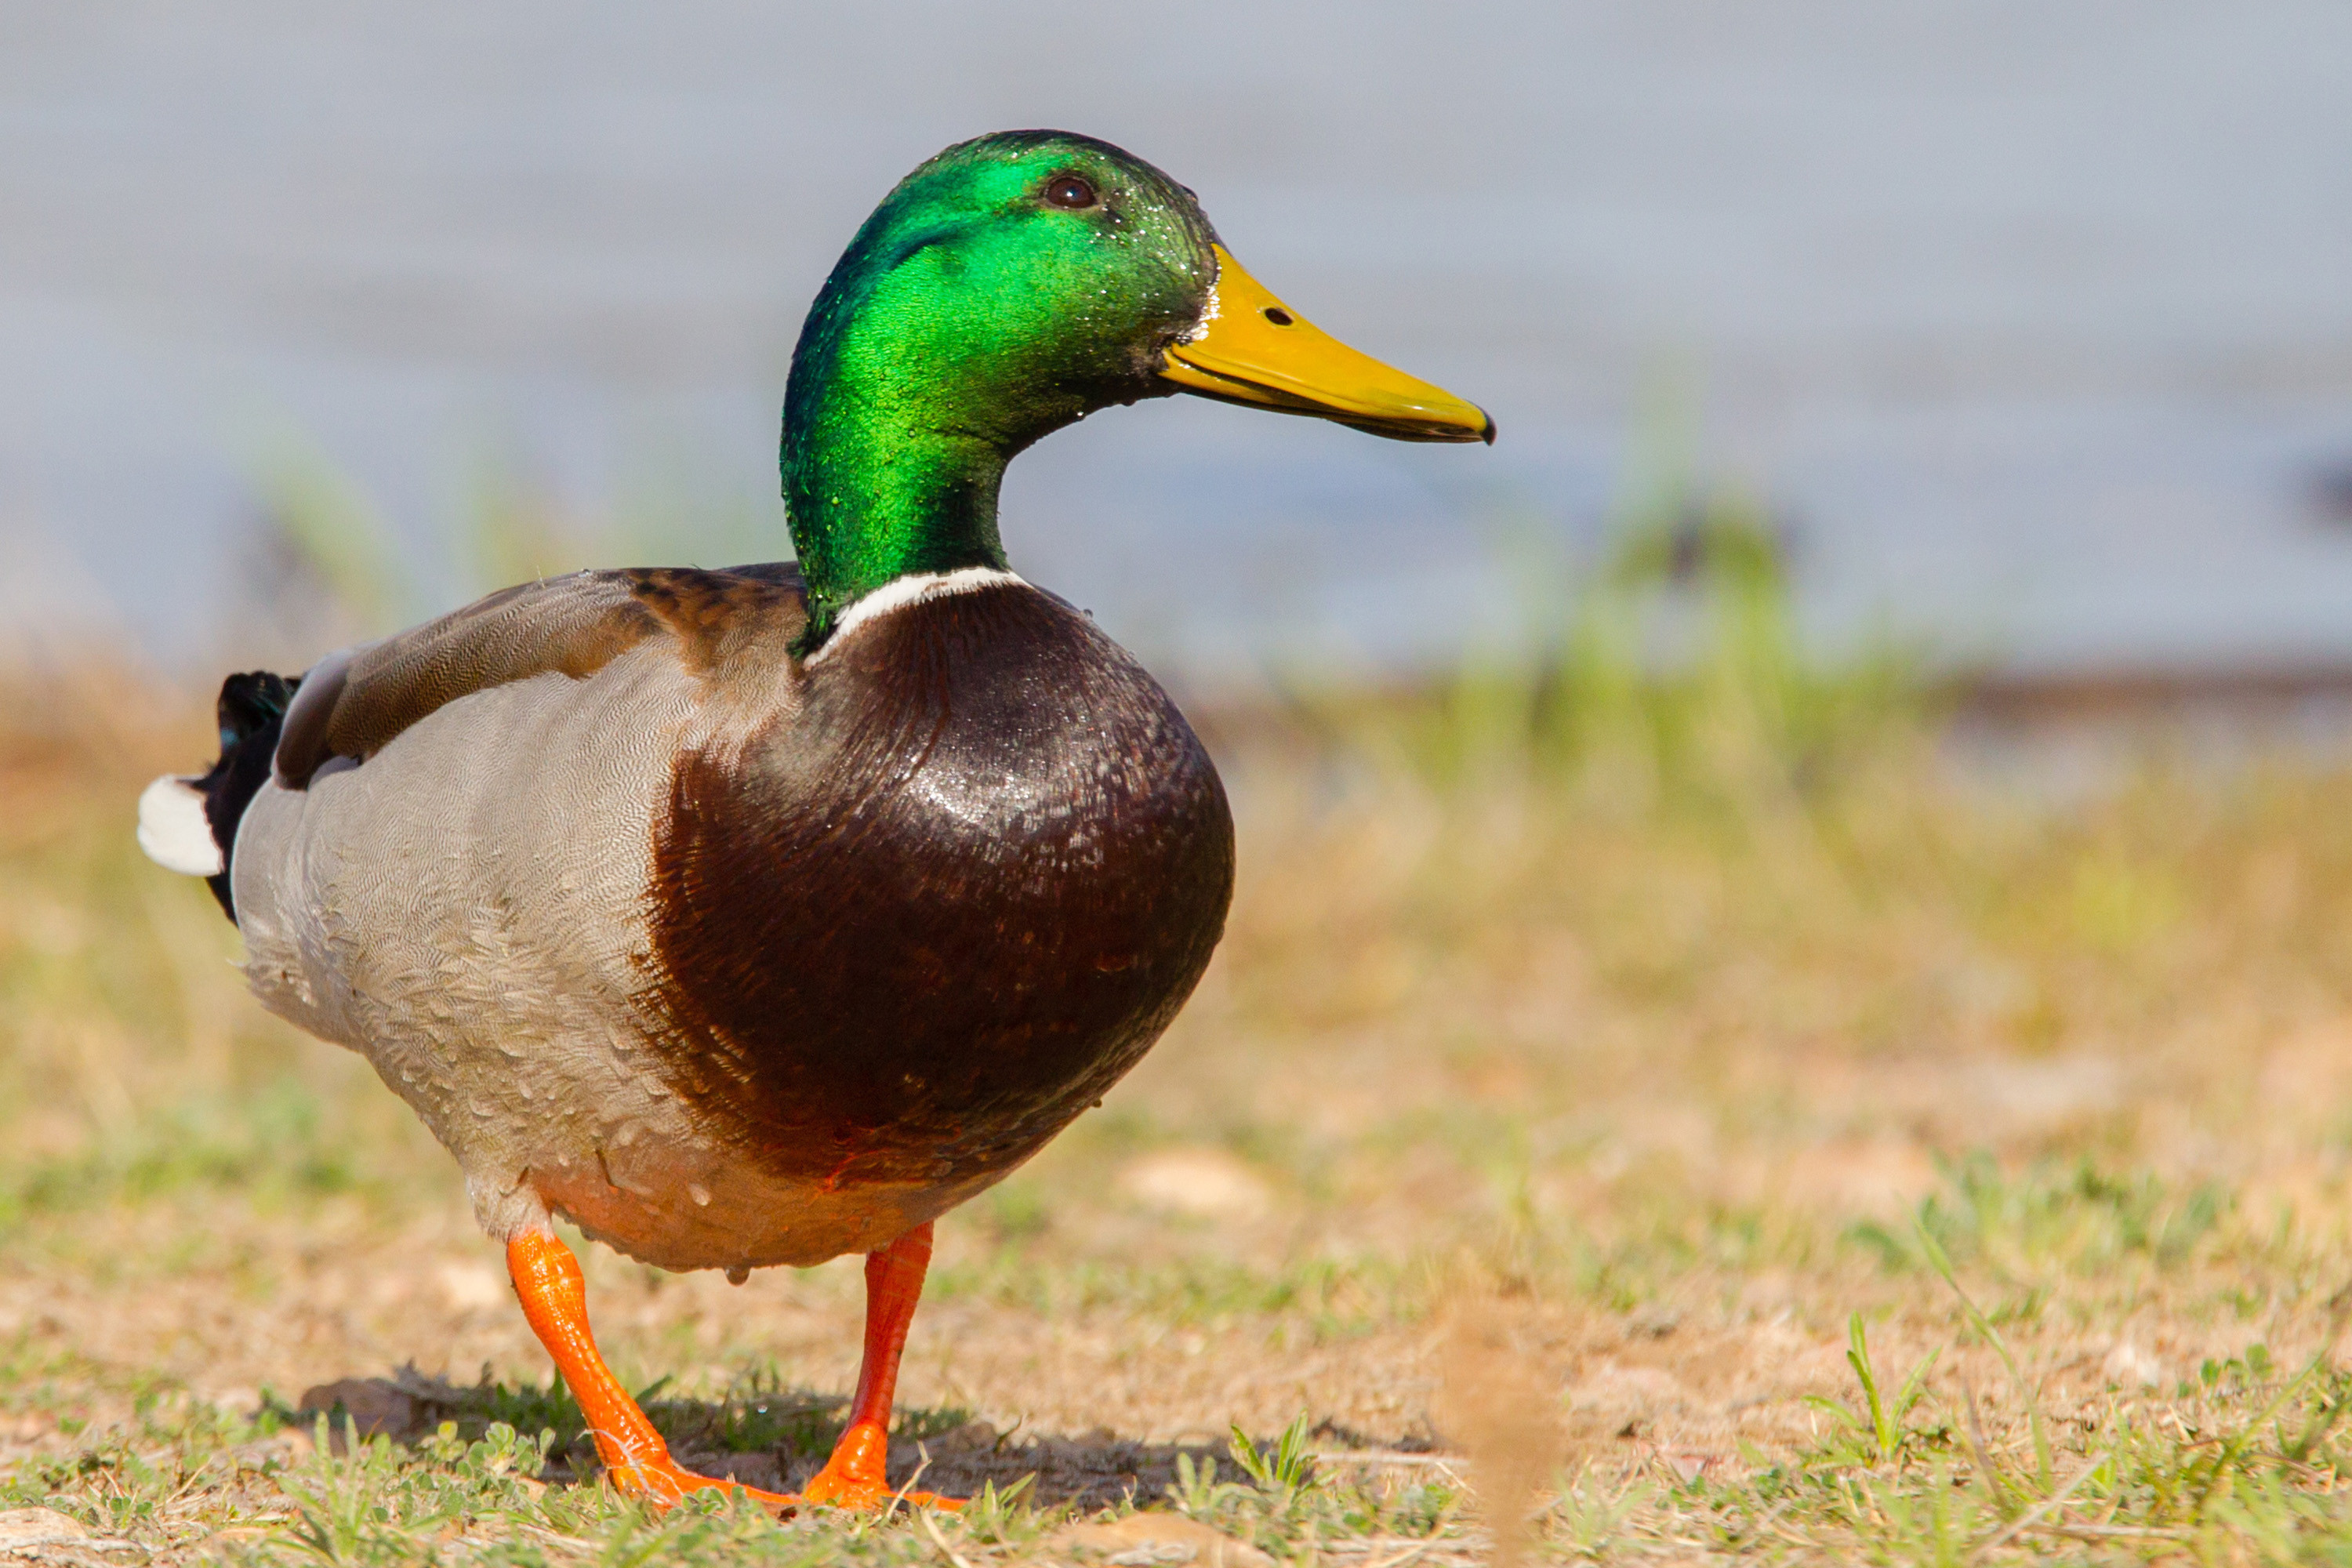 Duck quacks are safer and less stressful than car horns: study